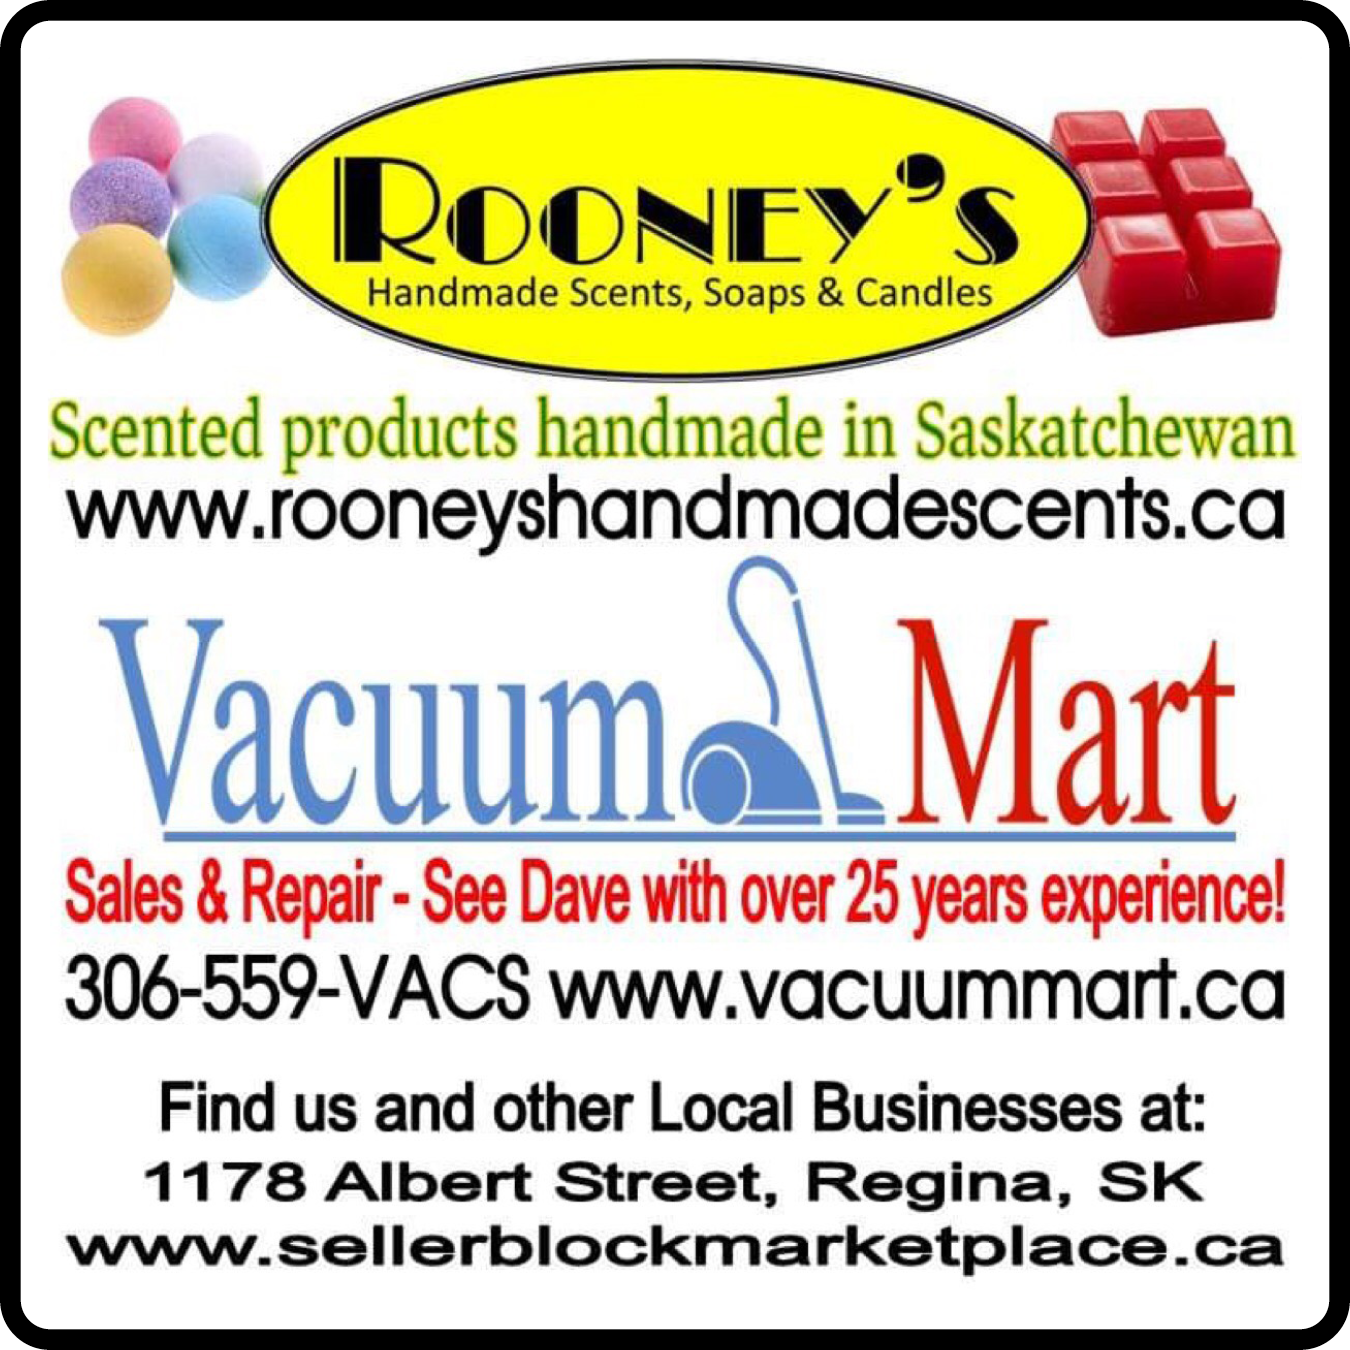 Rooney's Handmade Scents, Soaps & Candles